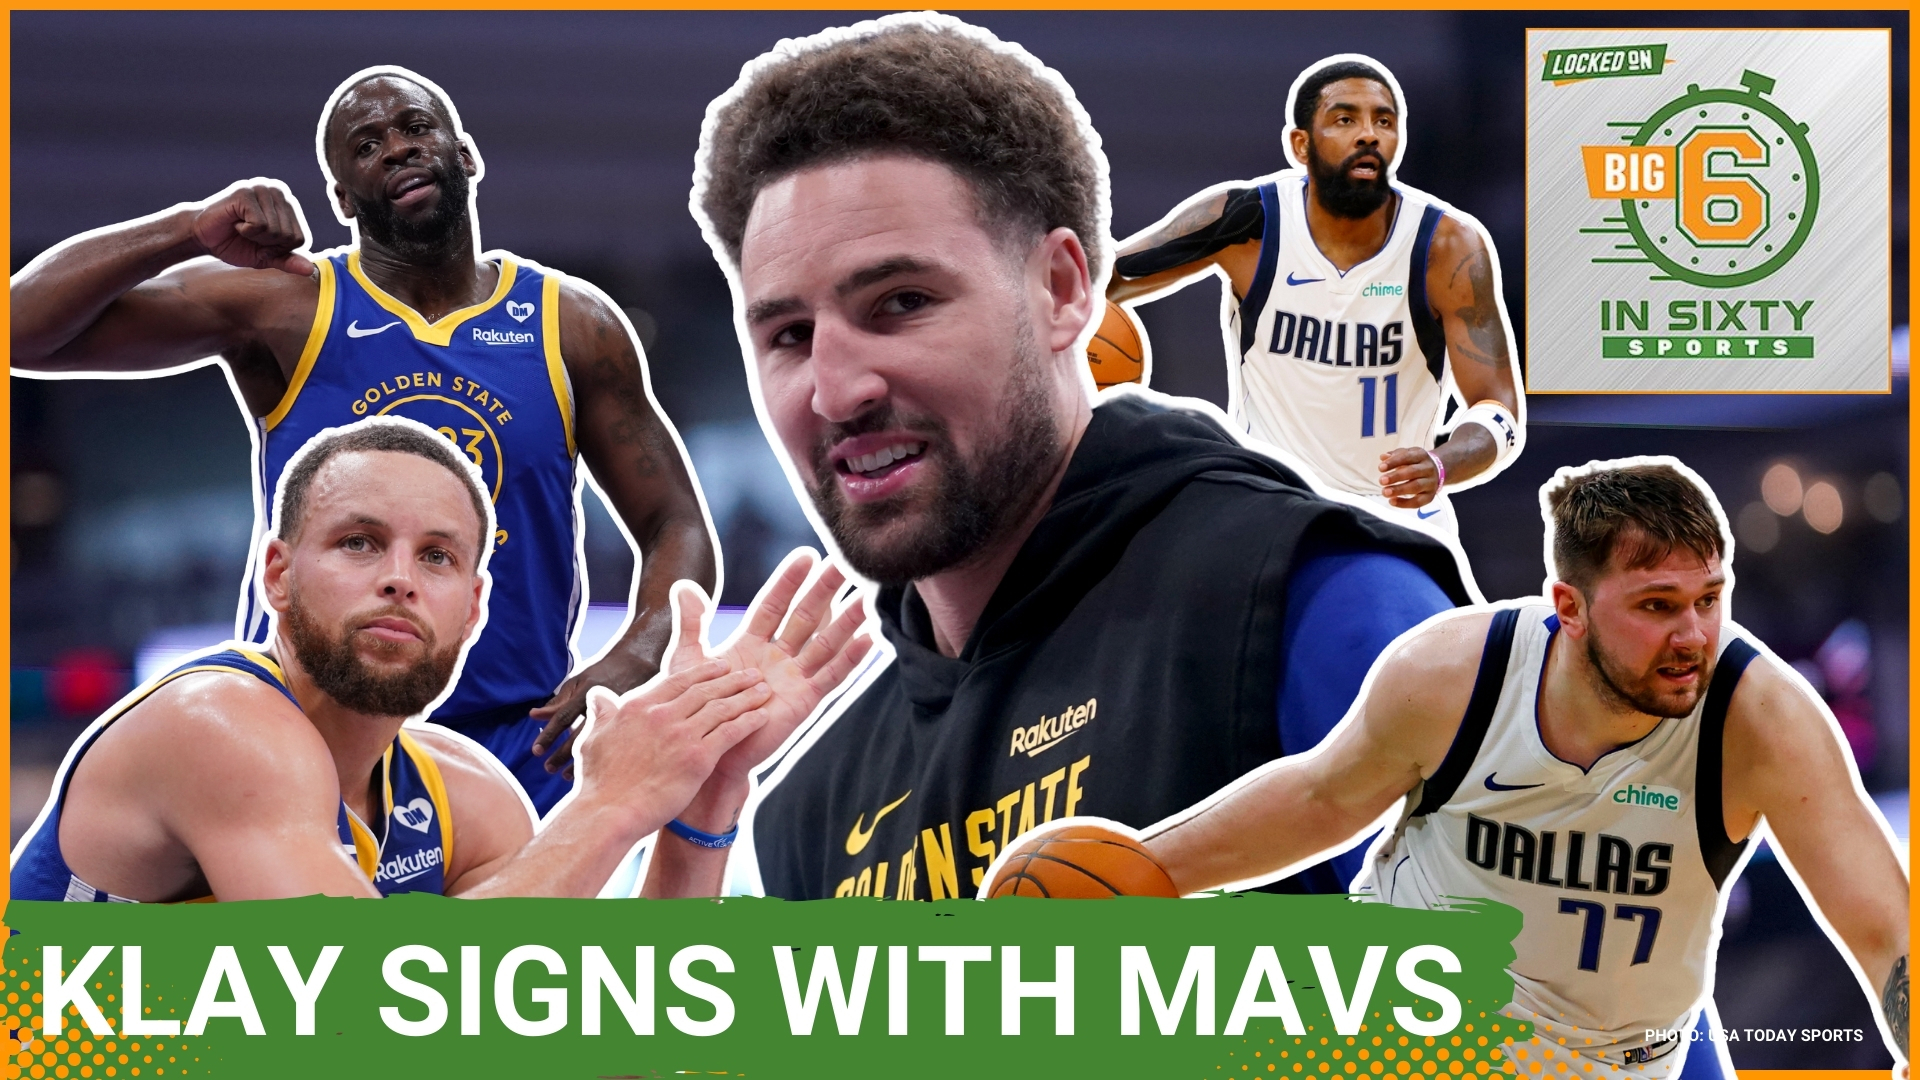 The Dallas Mavericks sign Klay Thompson and end the Splash Brothers, and the Thunder take Isaiah Hartenstein from the Knicks. The Pistons sign Tobias Harris.